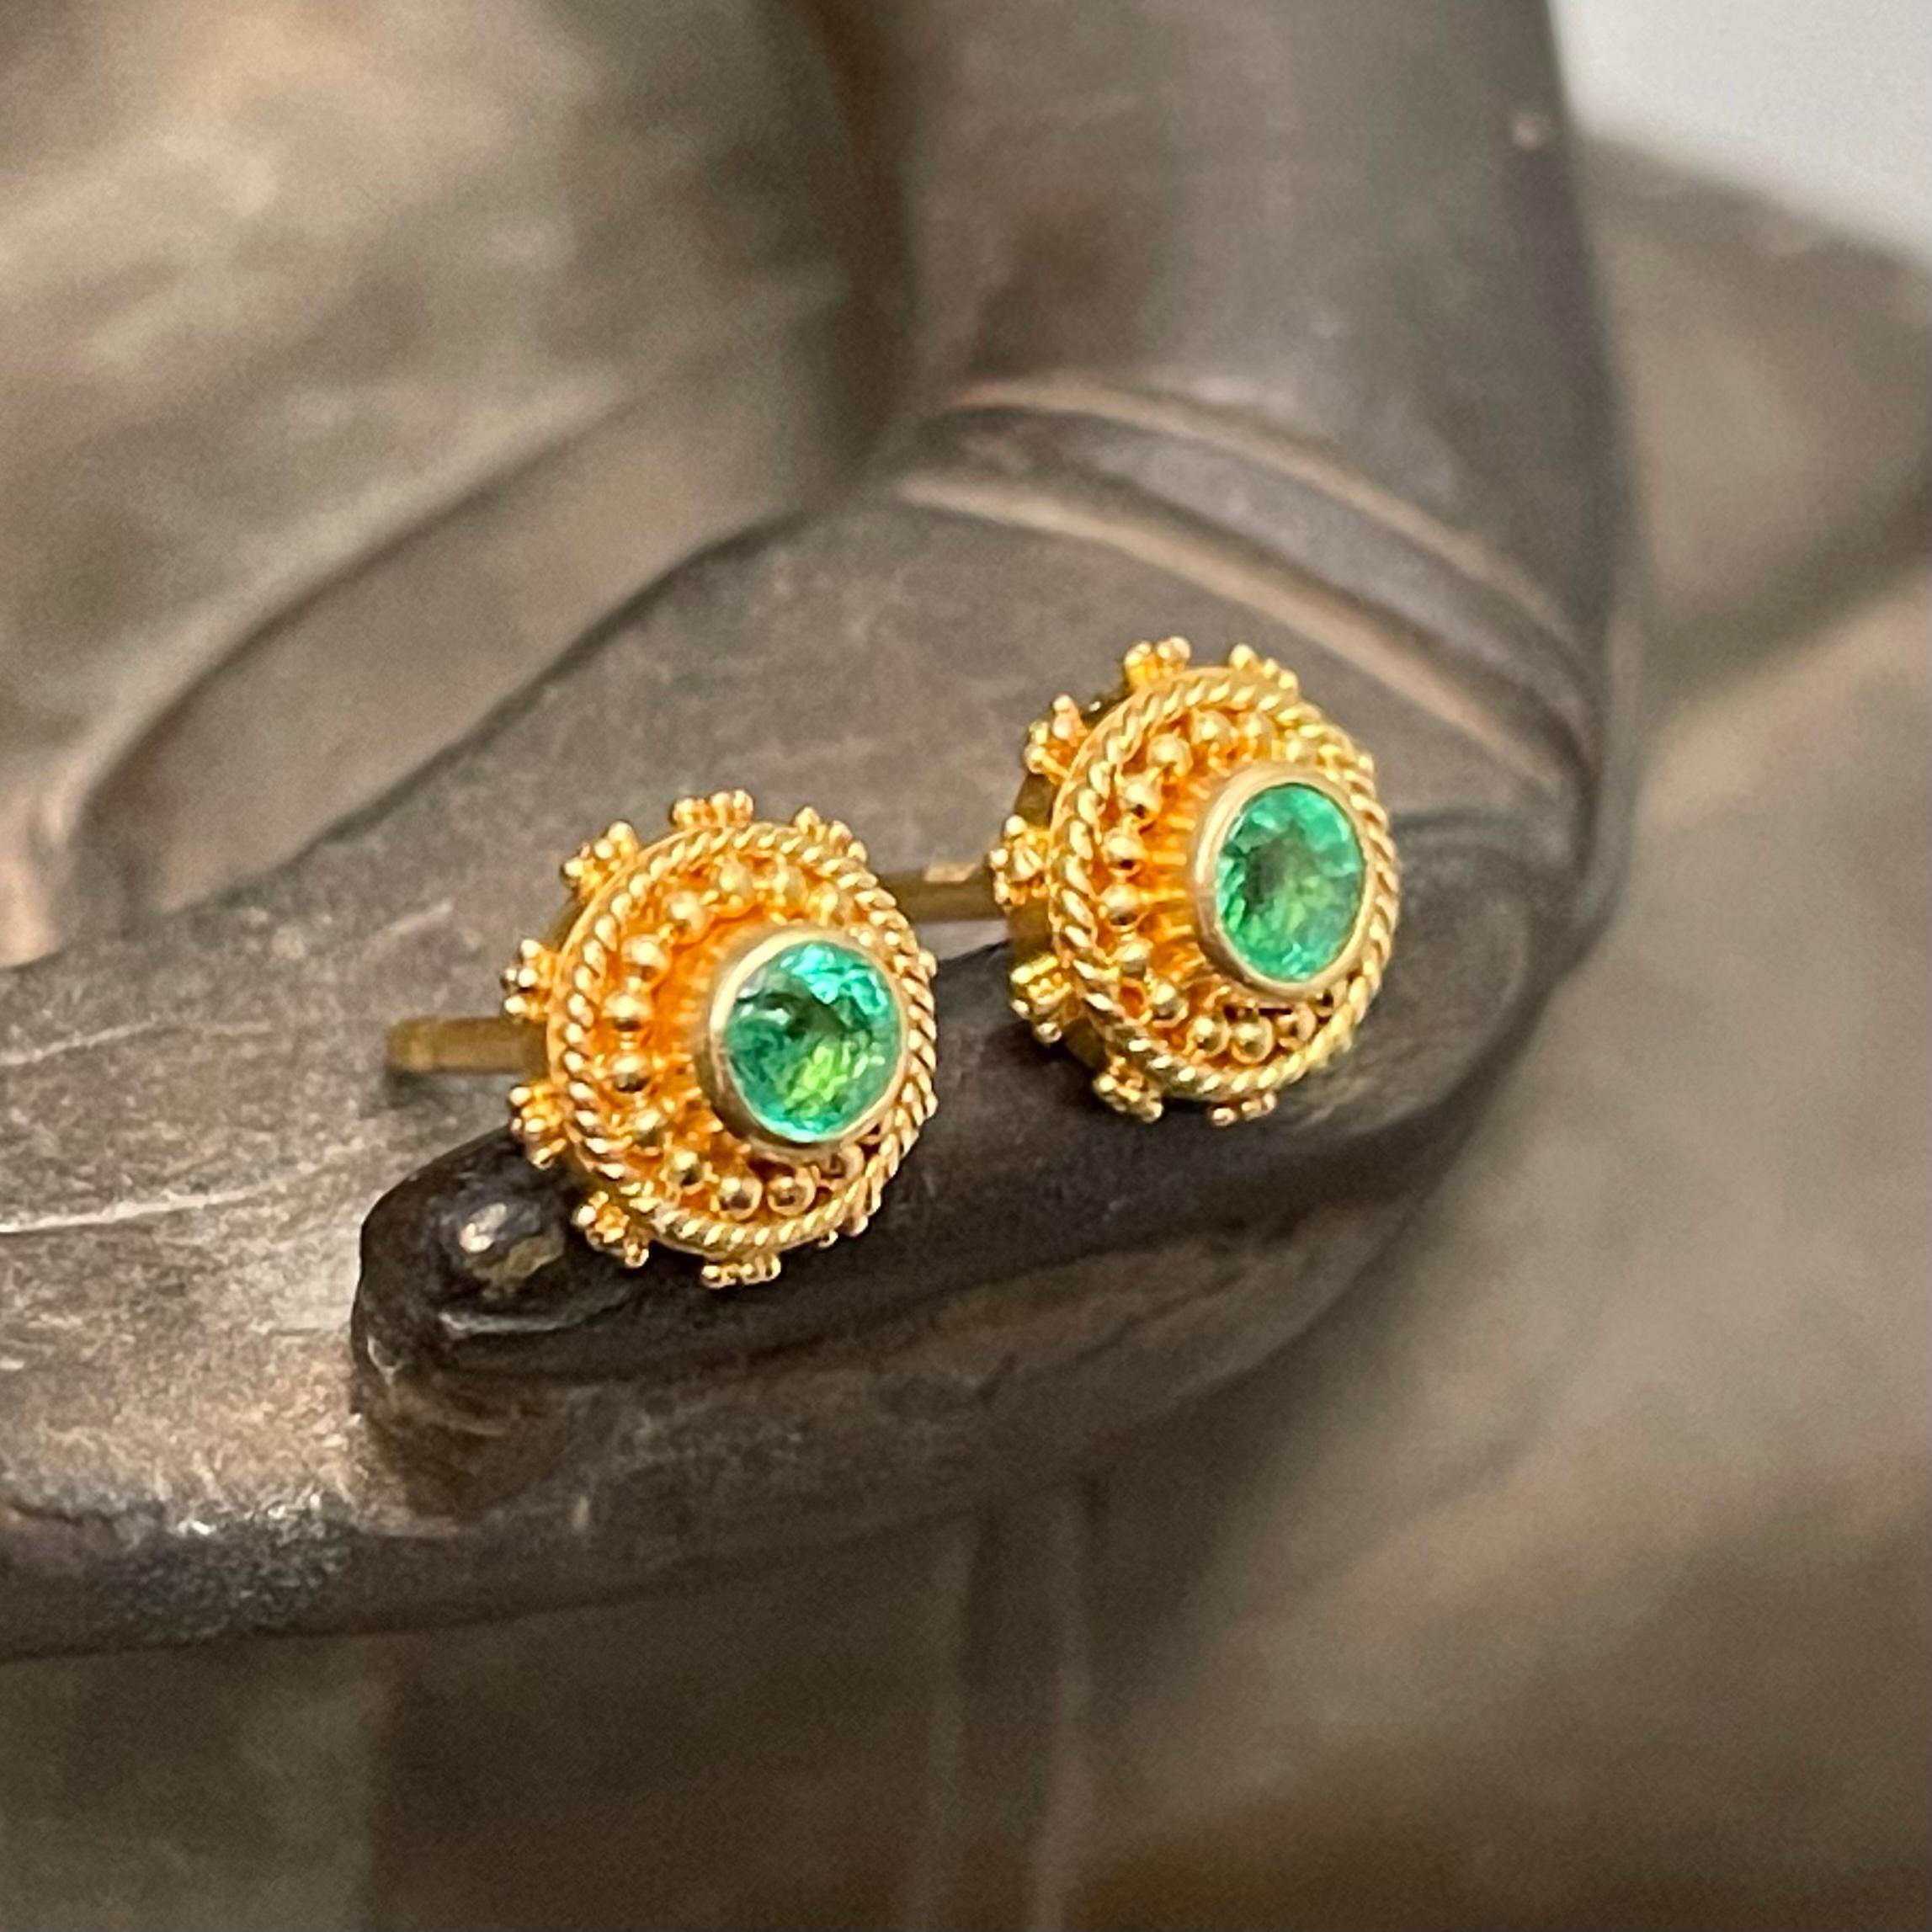 Two bright green 3mm faceted Columbian emeralds are set in delicate twist wire and granulation in these delightful post earrings. Truly fine gold-smithing went into the creation of these small treasures.  